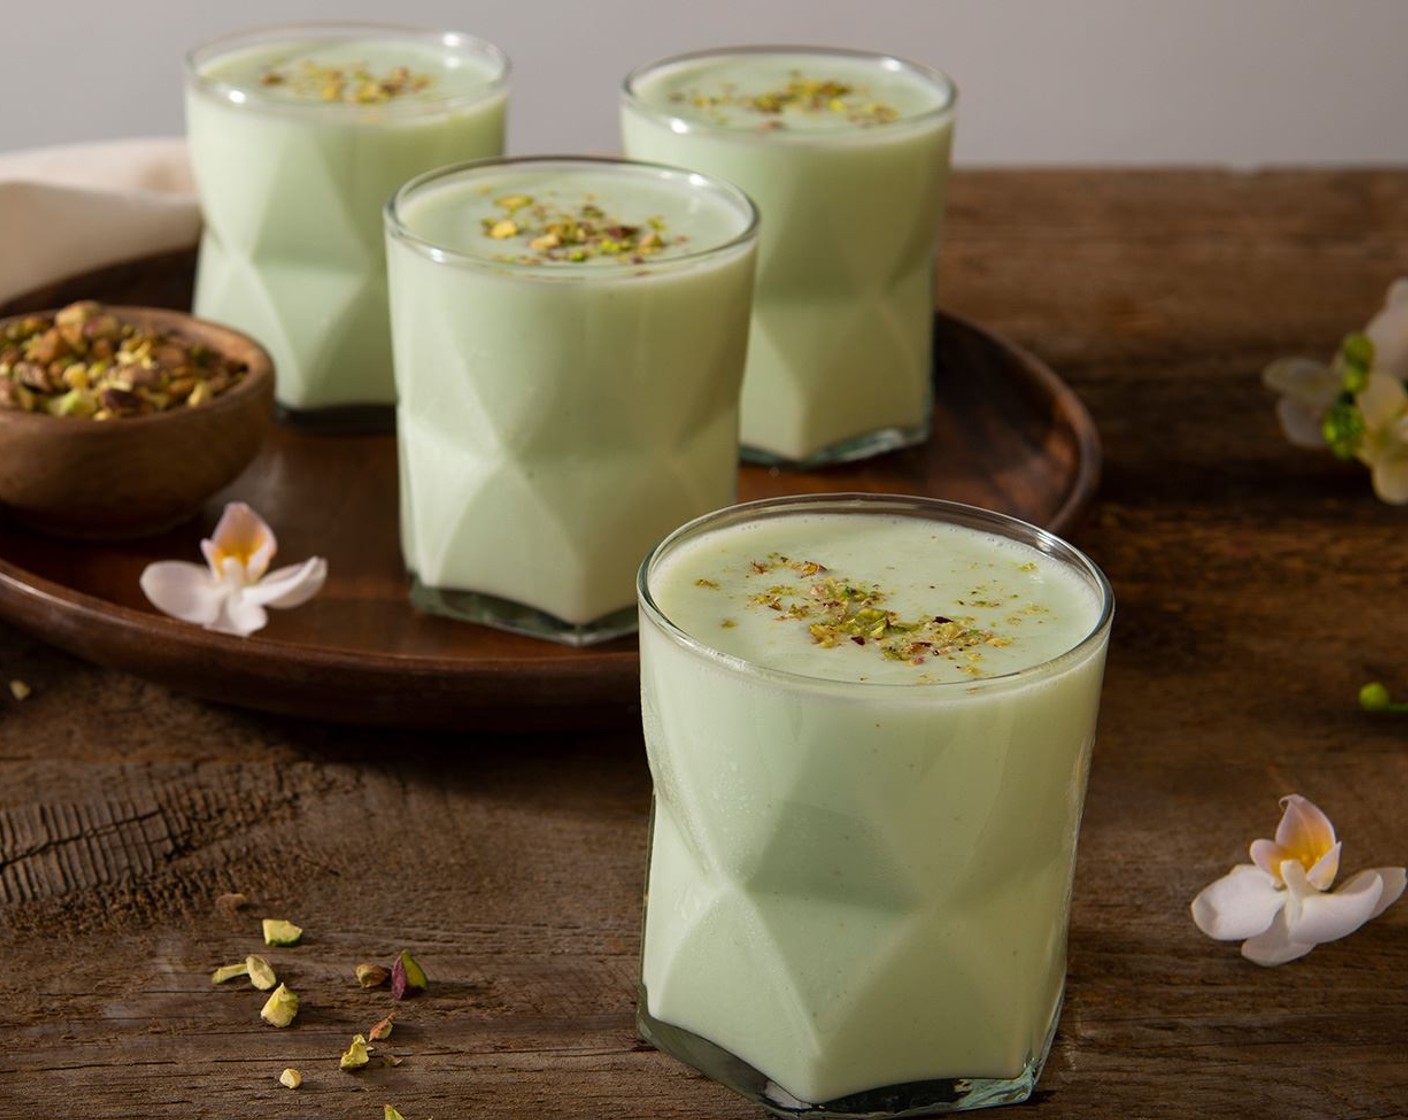 step 2 Divide among 6 glasses. Garnish with crushed Salted Pistachios (1/4 cup).